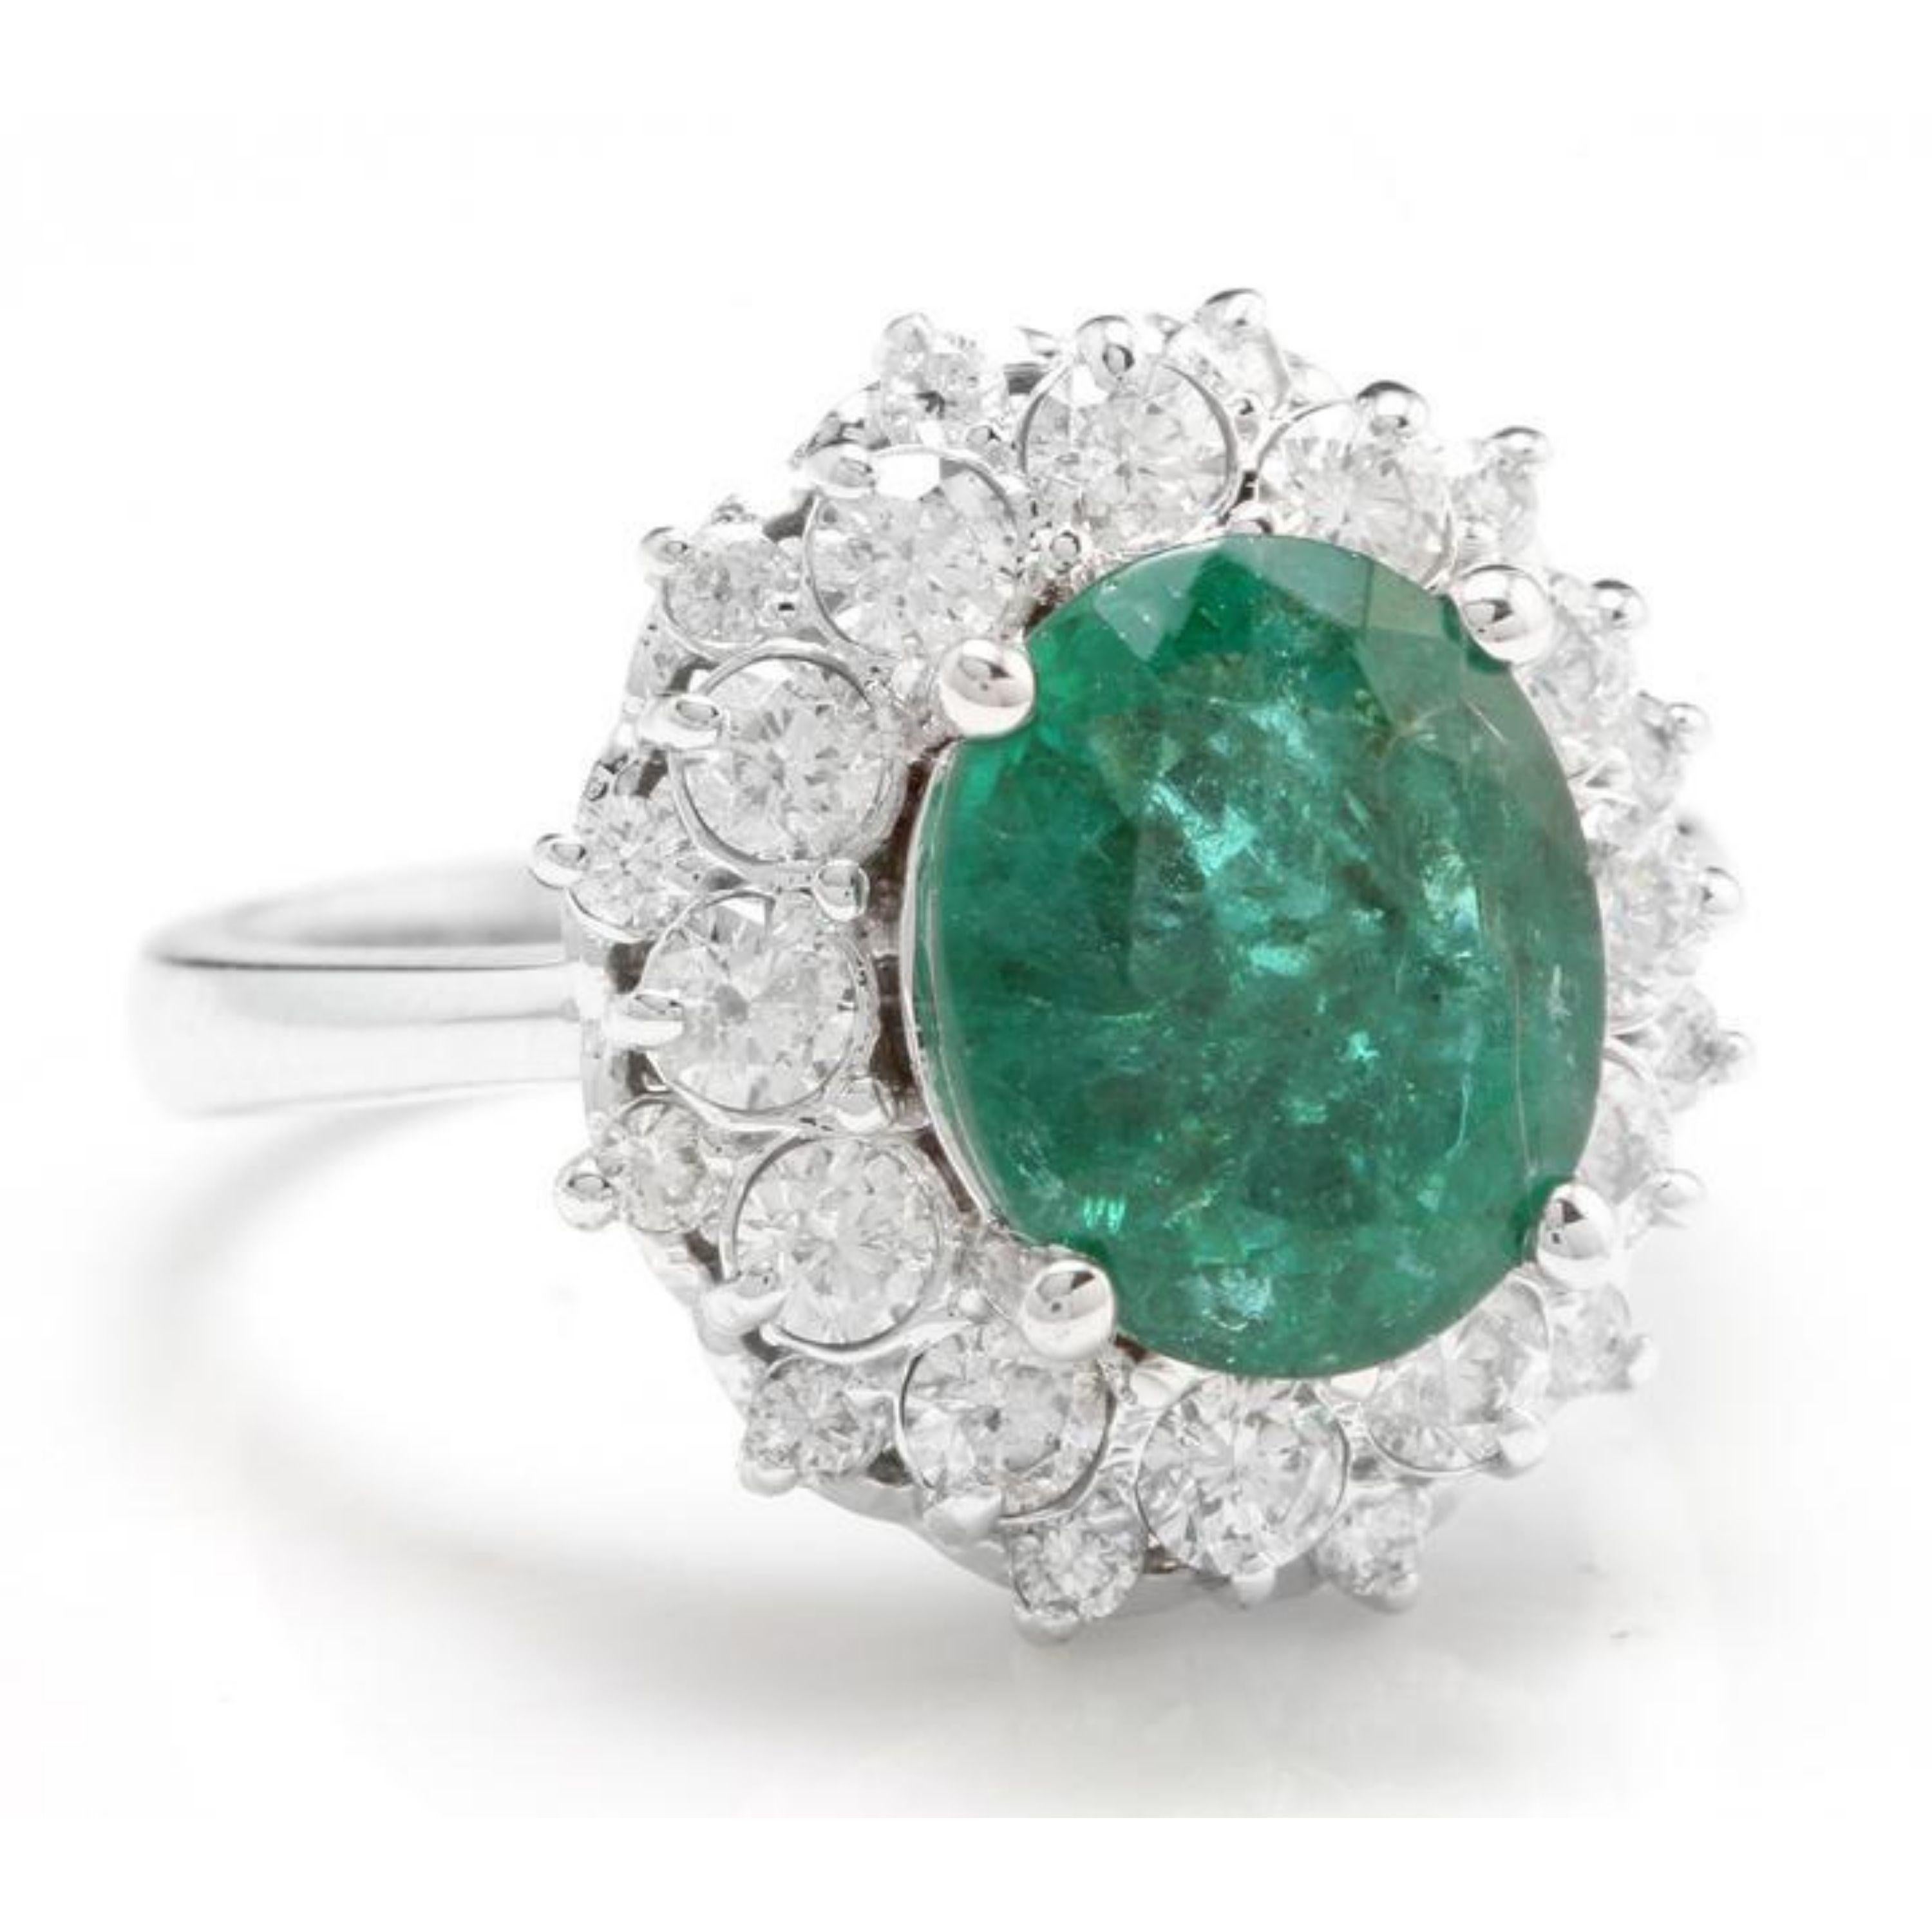 4.50 Carats Natural Emerald and Diamond 14K Solid White Gold Ring

Total Natural Green Emerald Weight is: Approx. 3.00 Carats (transparent)

Emerald Treatment: Oiling

Emerald Measures: 9 x 7mm

Natural Round Diamonds Weight: Approx. 1.50 Carats